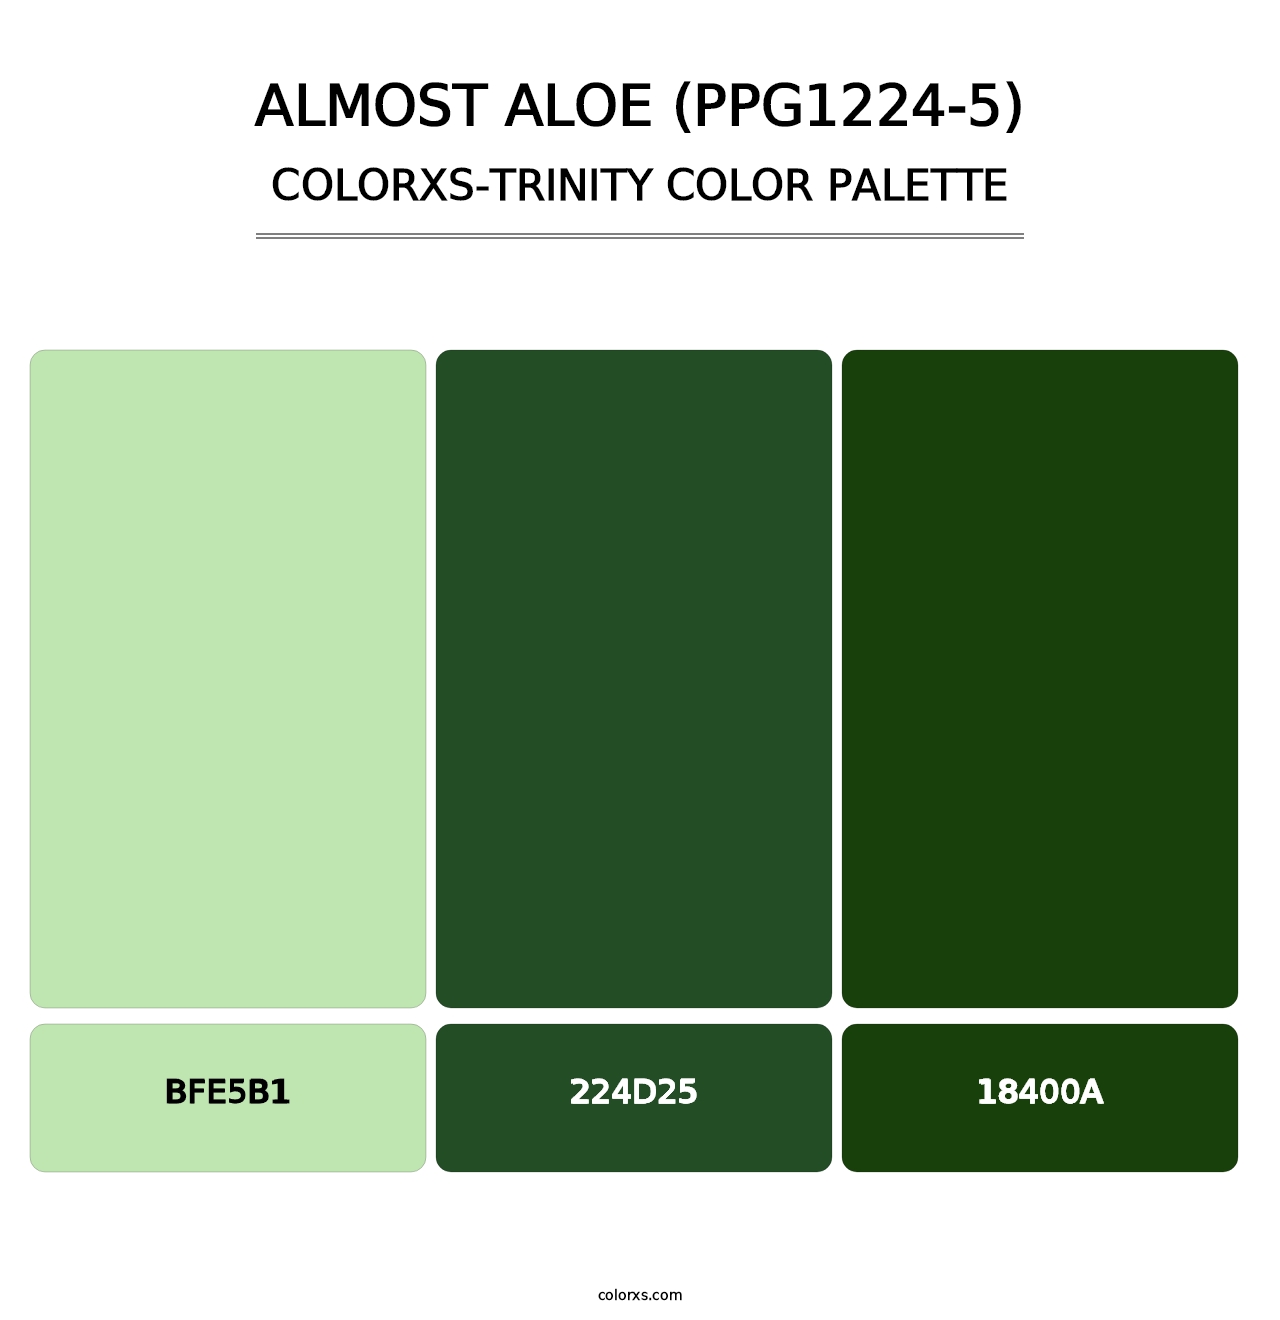 Almost Aloe (PPG1224-5) - Colorxs Trinity Palette